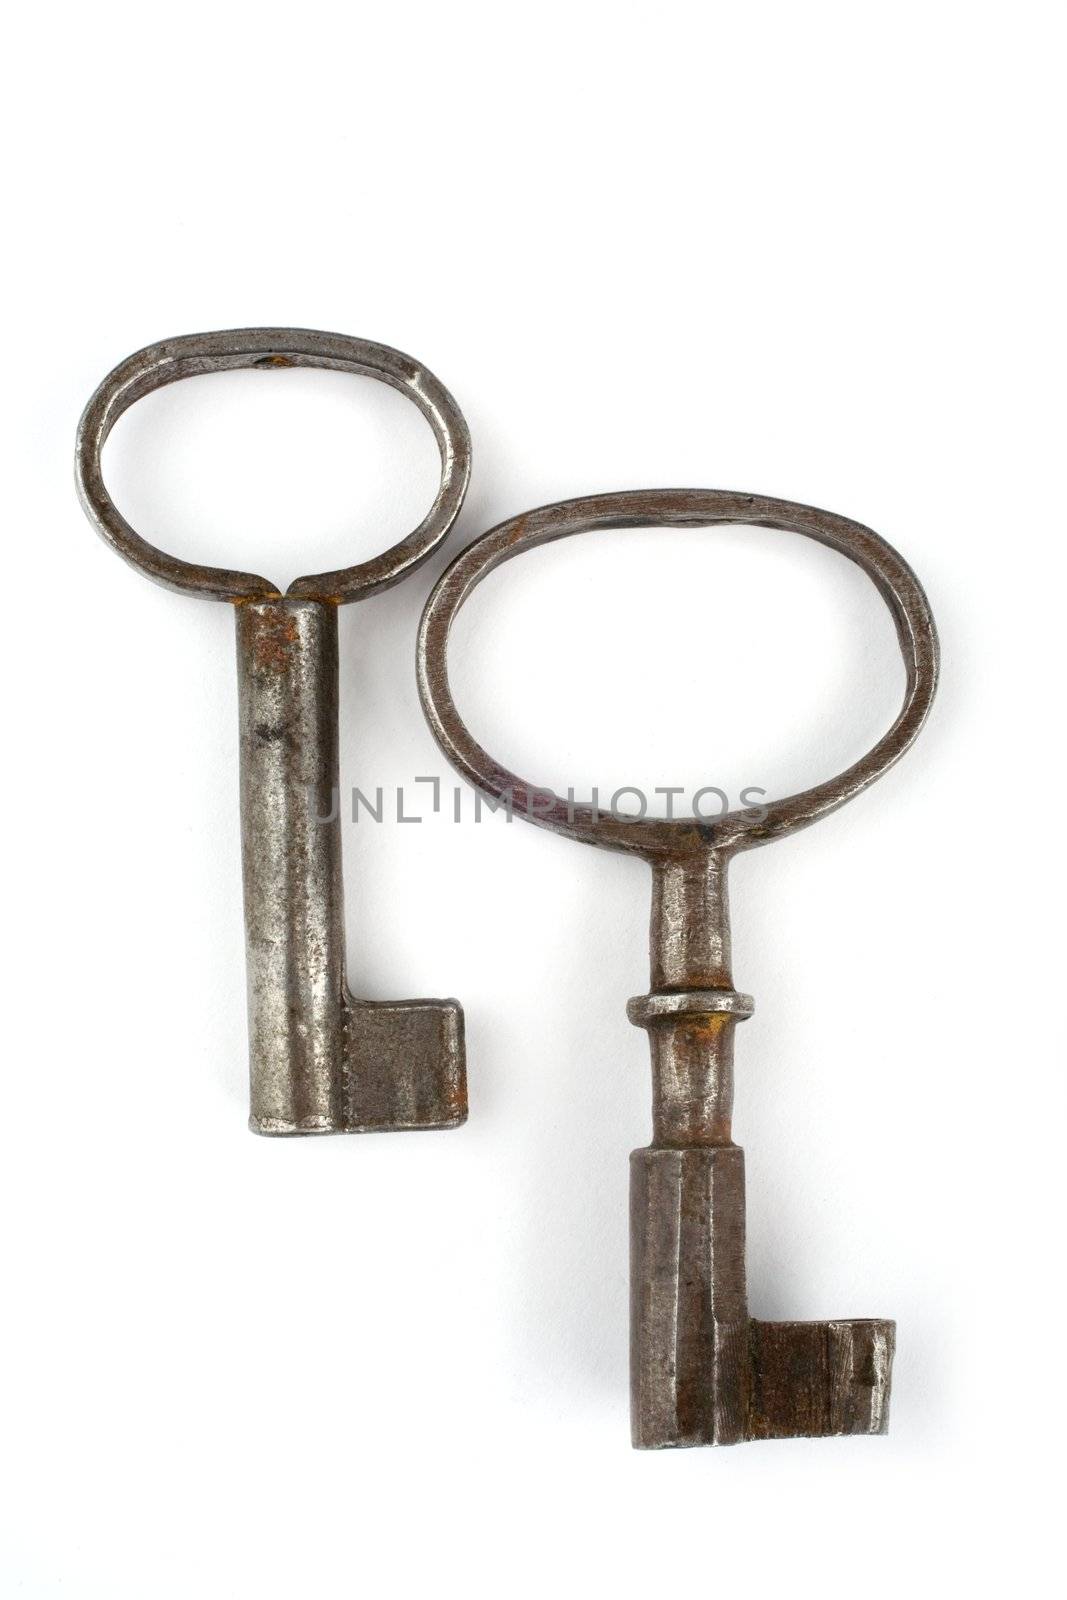 two old keys on a white background